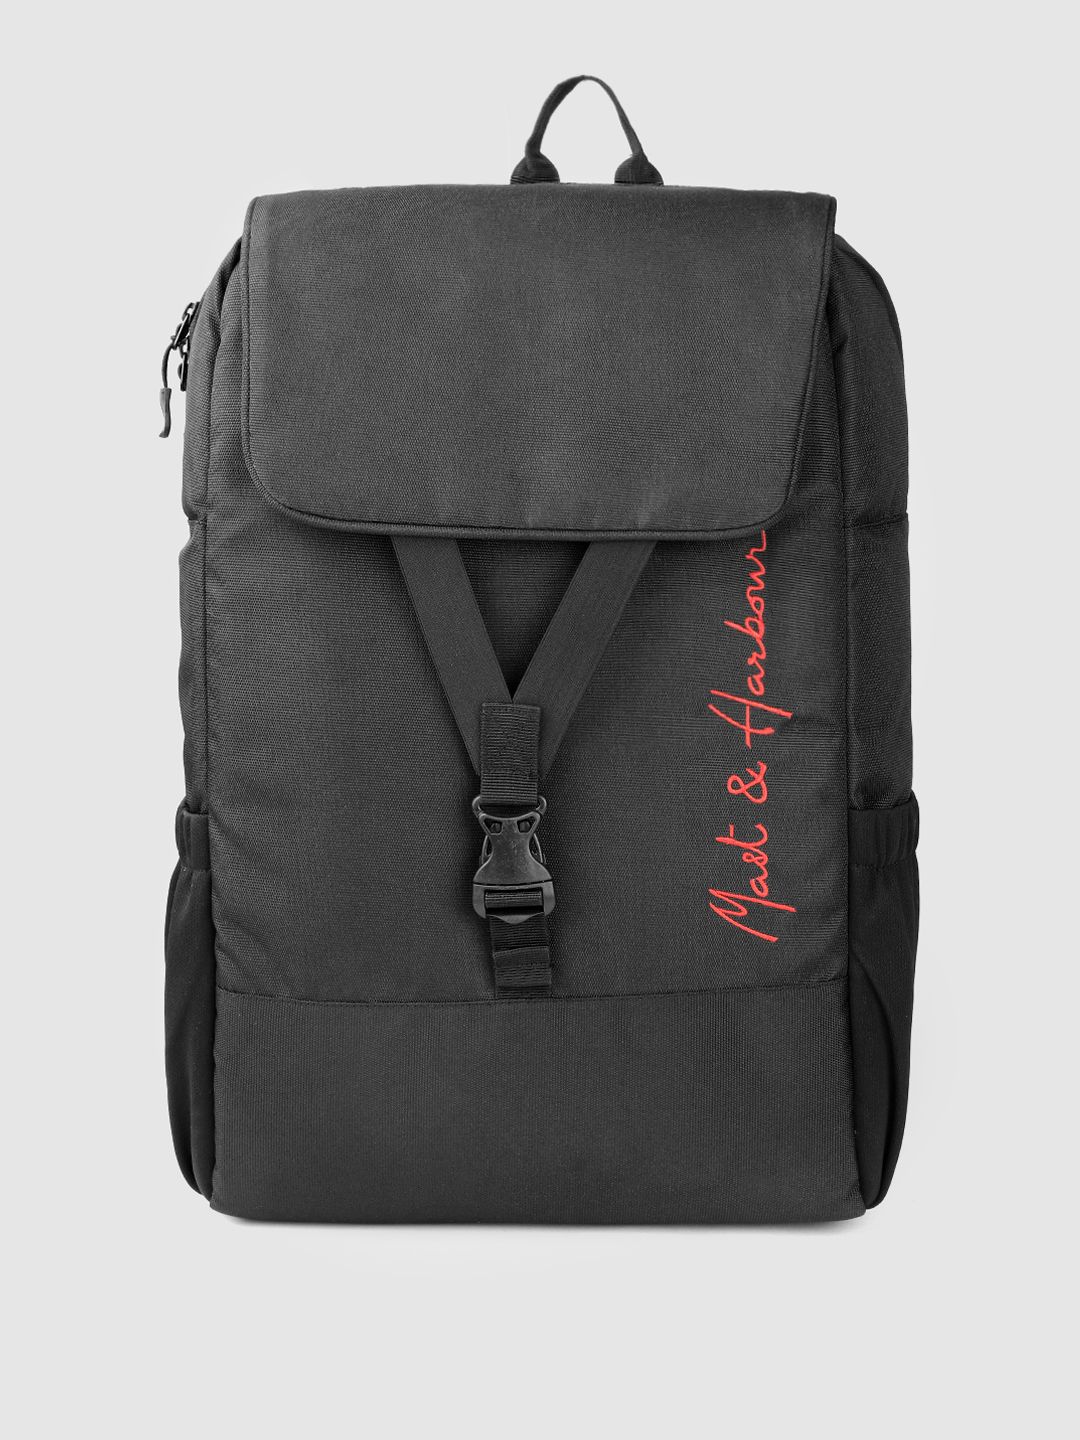 Mast & Harbour Unisex Black Solid Backpack 21.1 L Price in India